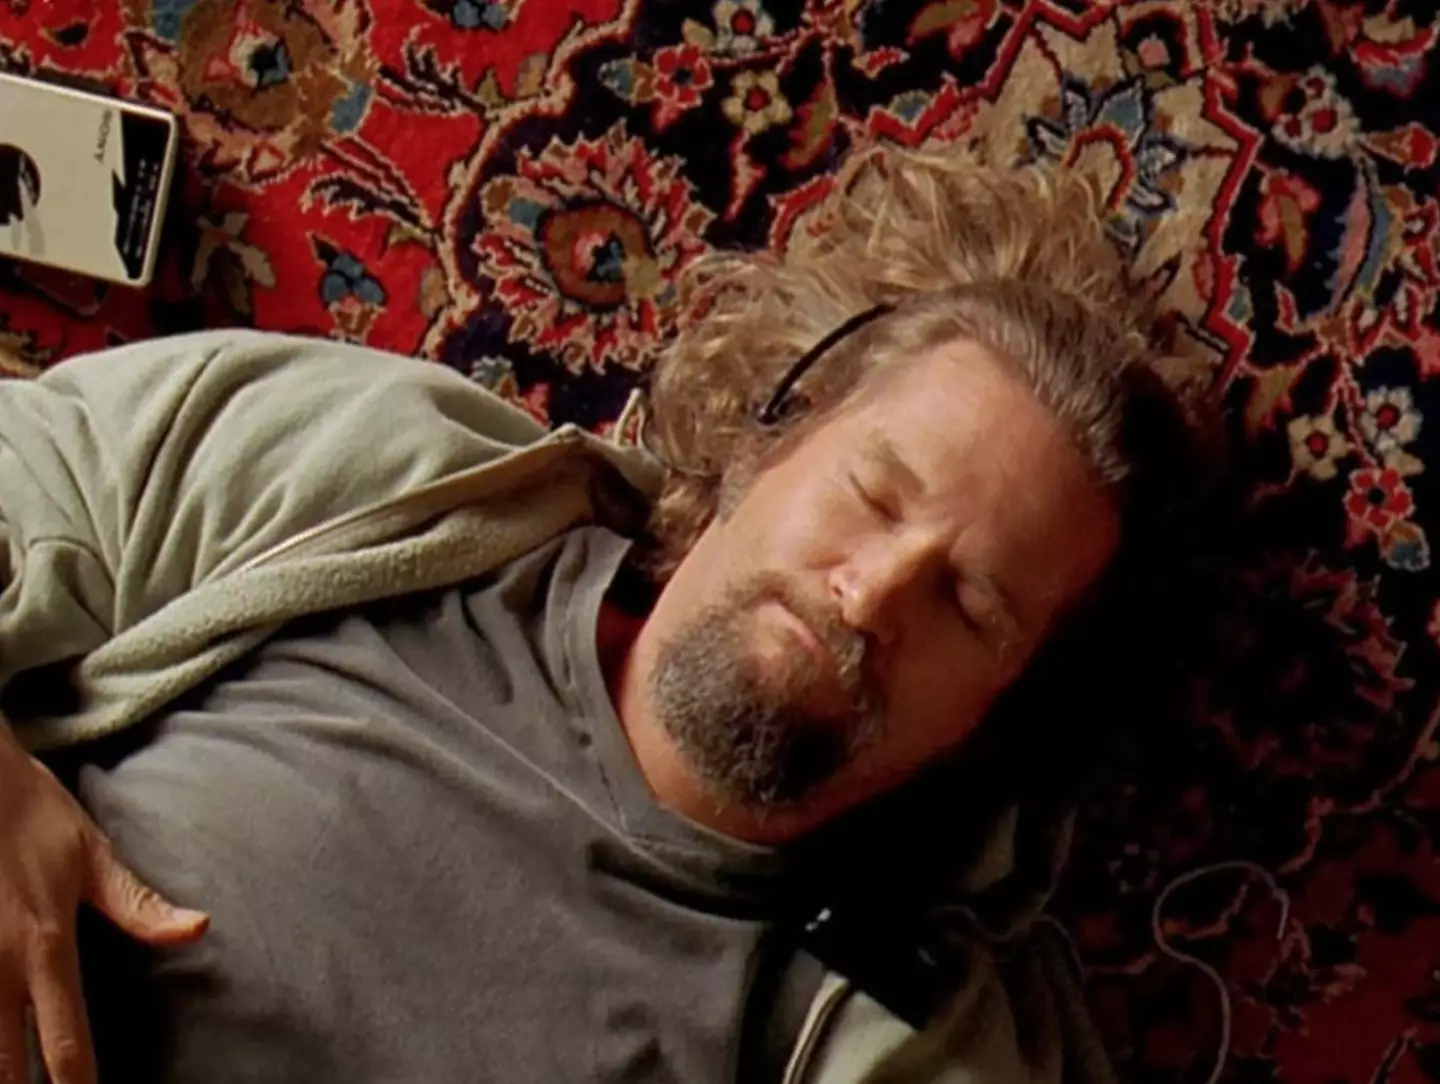 Streamers have a chance to get to know Jeff Bridges' The Dude as he attempts to get restitution for a ruined rug.